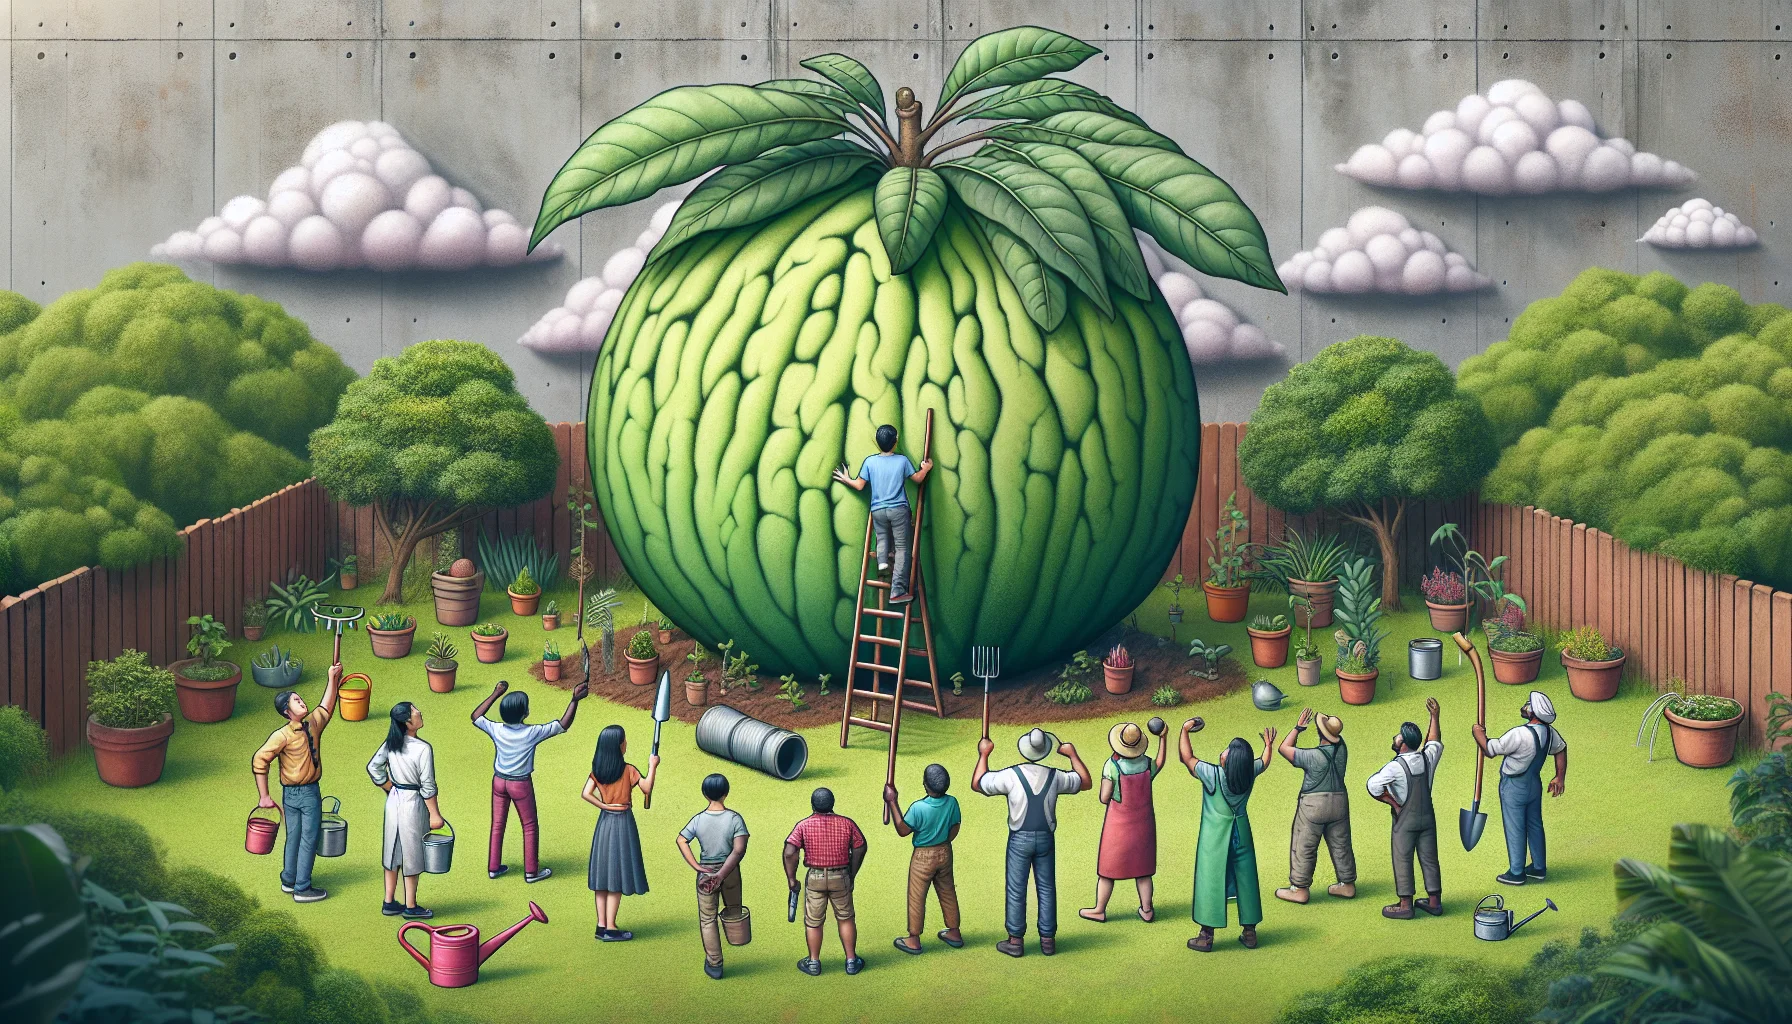 Create a hilarious illustration of a garden scene starring a gigantic Sharon fruit. The colossal fruit, almost the size of a small house, is planted in the center of the green garden. It has a cloudy aura around it showcasing its special stature. A group of multicultural, diverse gendered individuals ranging from an Asian male gardener, a Black female botanist, a Middle Eastern male horticulturist to a South Asian female agronomist, all stand in awe of it, their gardening tools held mid-air in surprise. Humorous elements like a ladder too short to reach the fruit and a watering can comically small compared to the fruit enhance the scene.